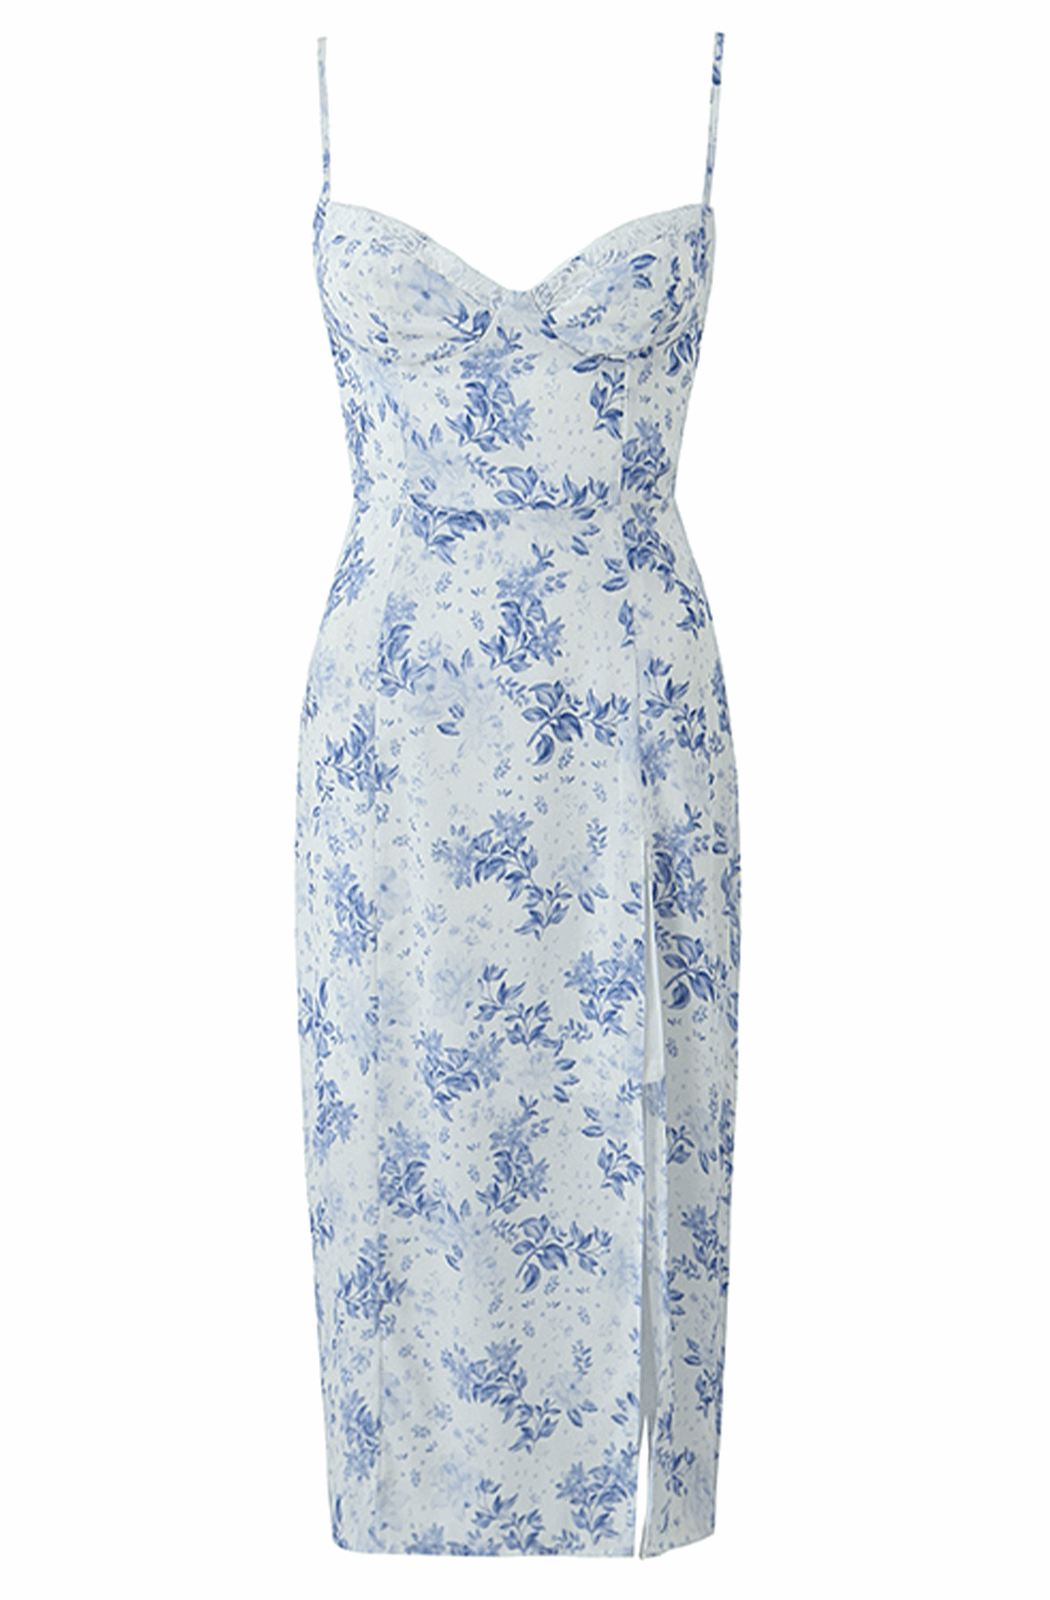 Blue and white floral midi dress